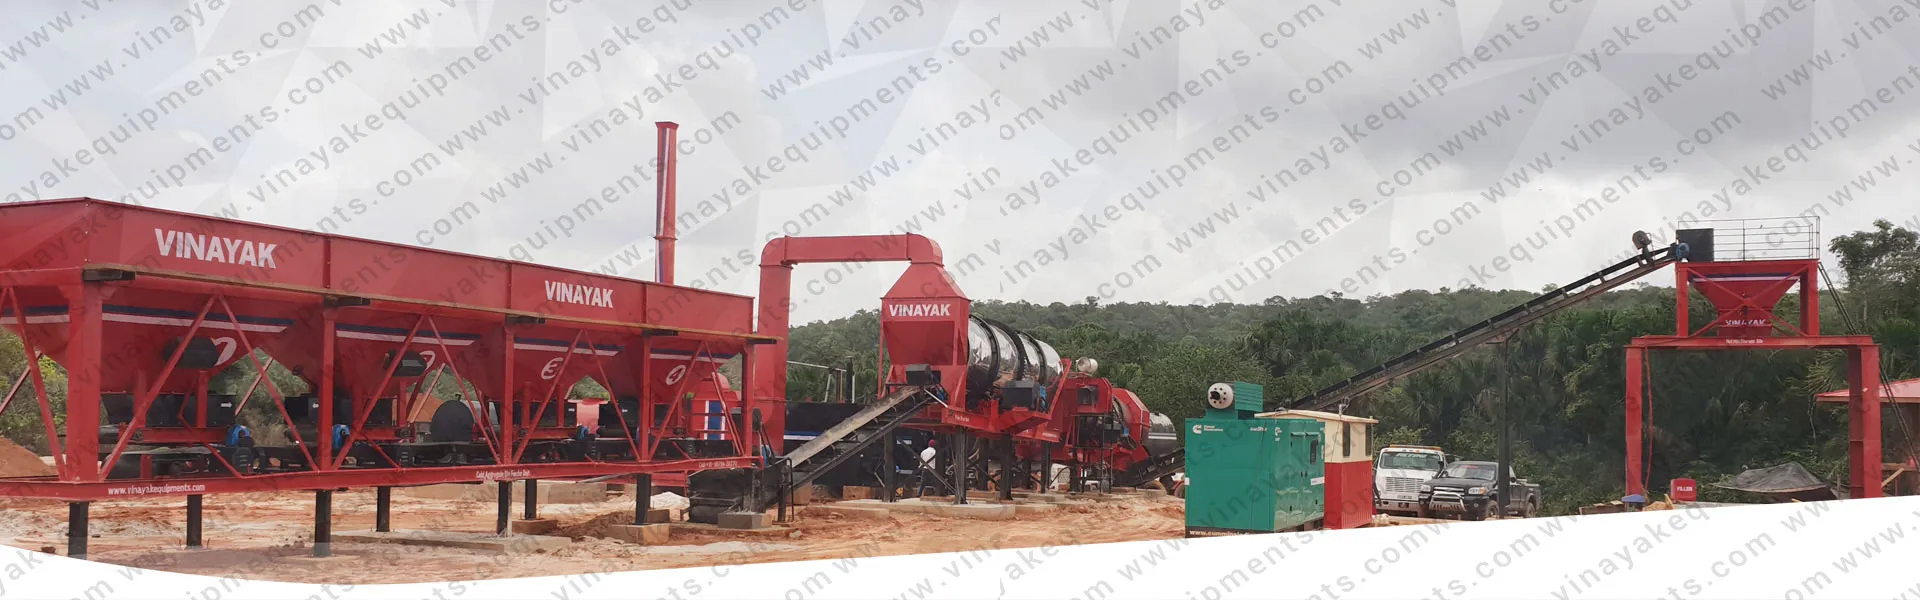 Asphalt Drum Mixing Plant Exporters from India